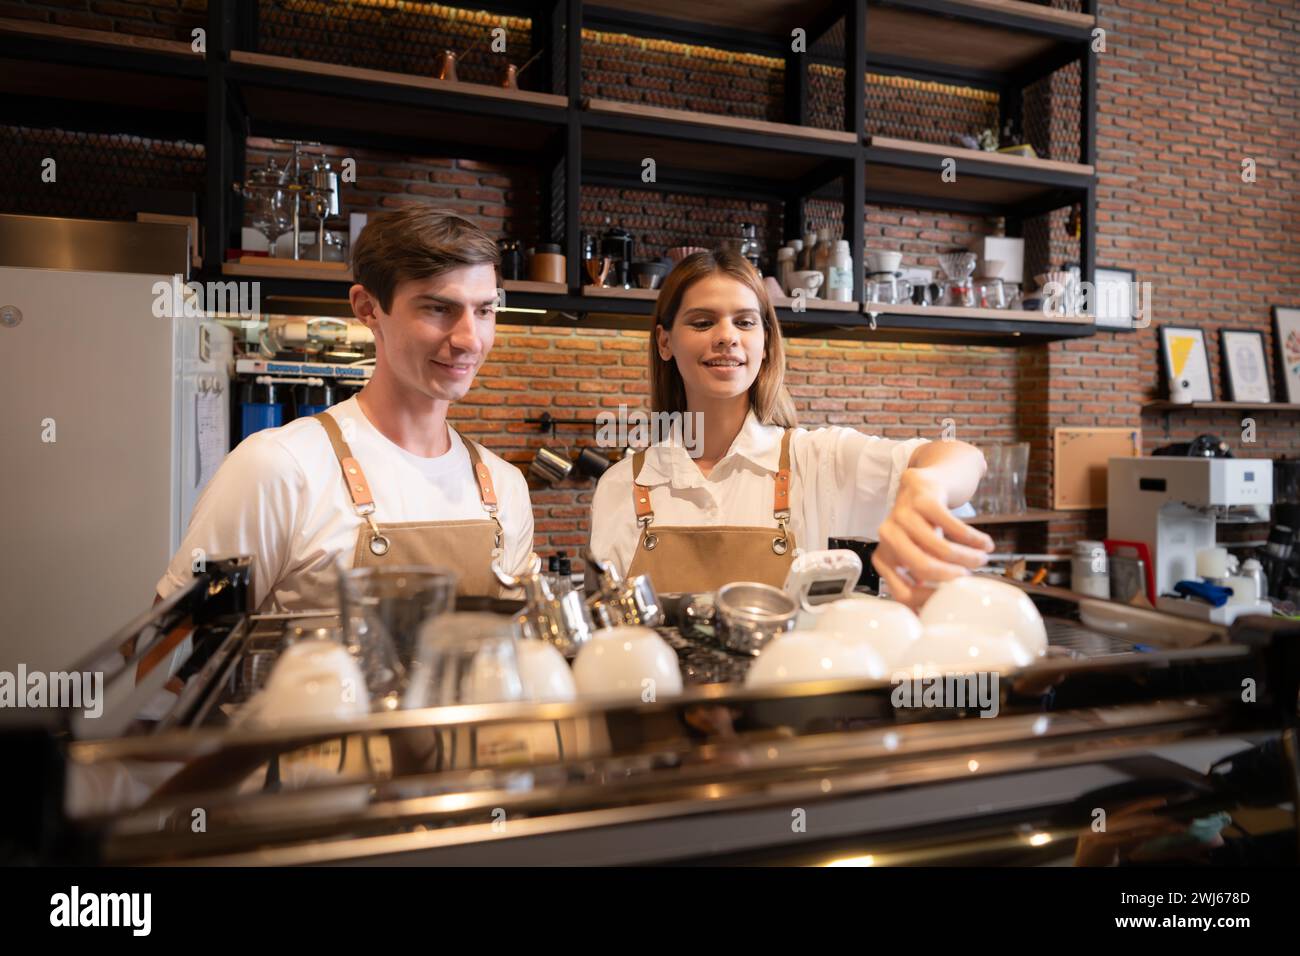 Barista working in cafe. Portrait of young male barista standing behind counter in coffee shop. Stock Photo